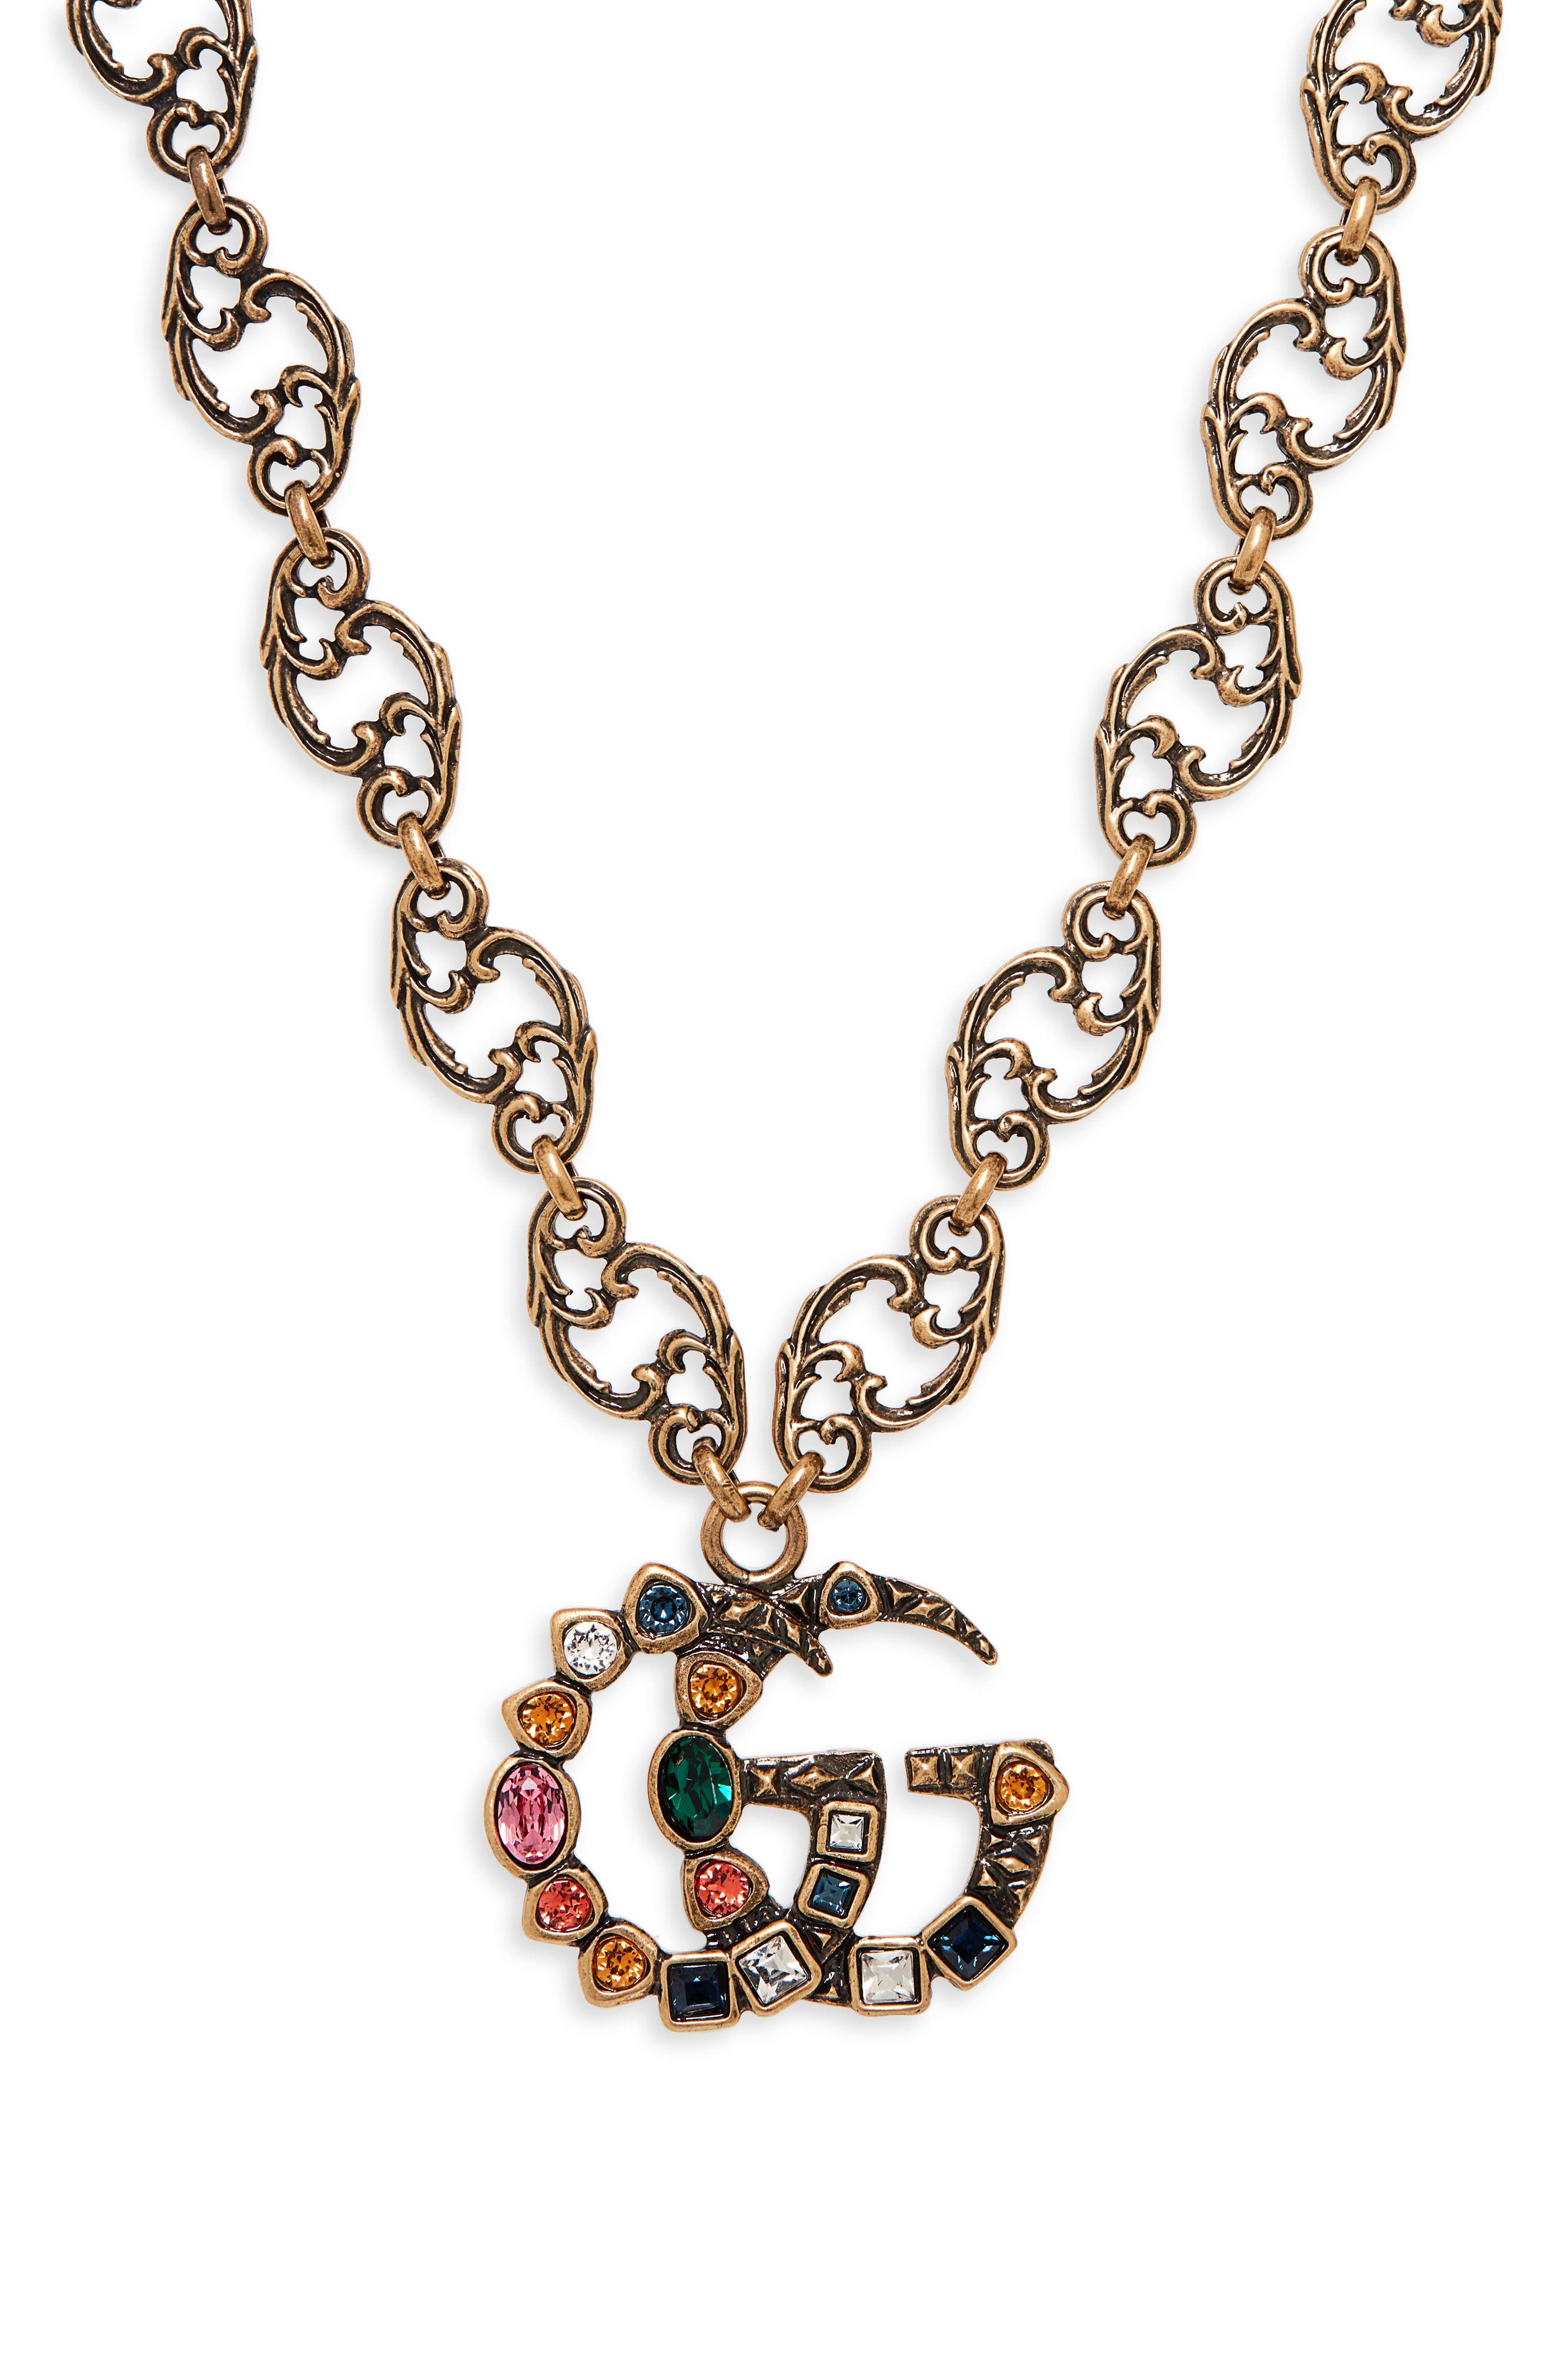 gucci inspired necklace